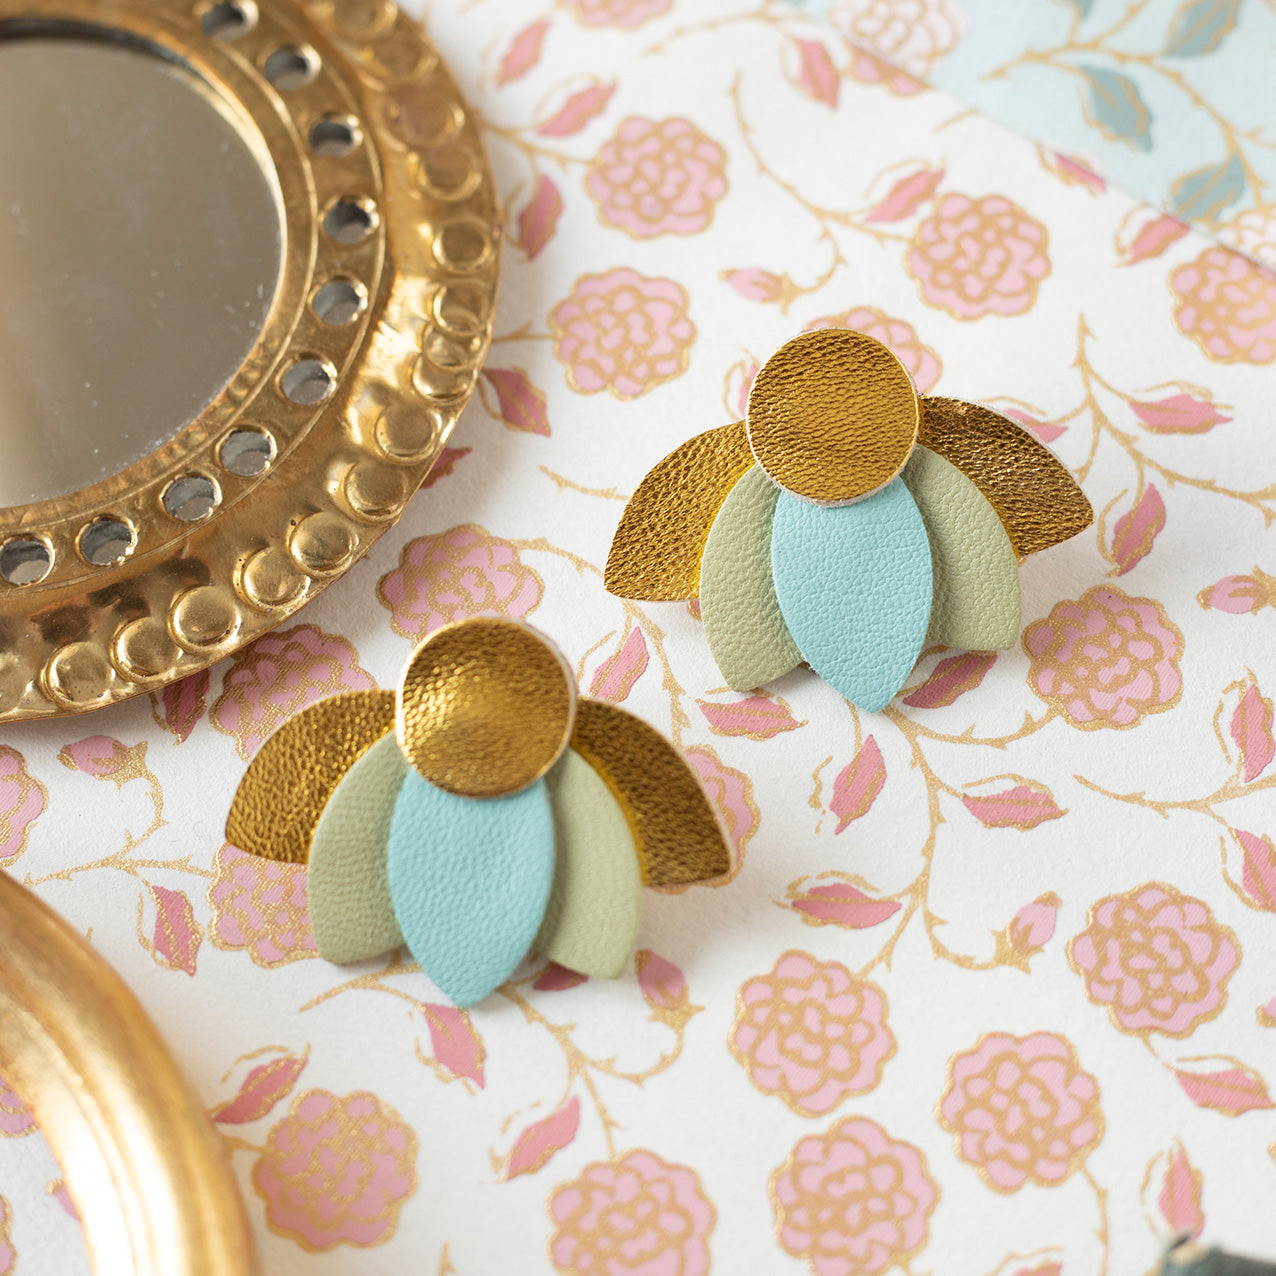 Large Lotus Flower stud earrings - light turquoise, pistachio green and gold